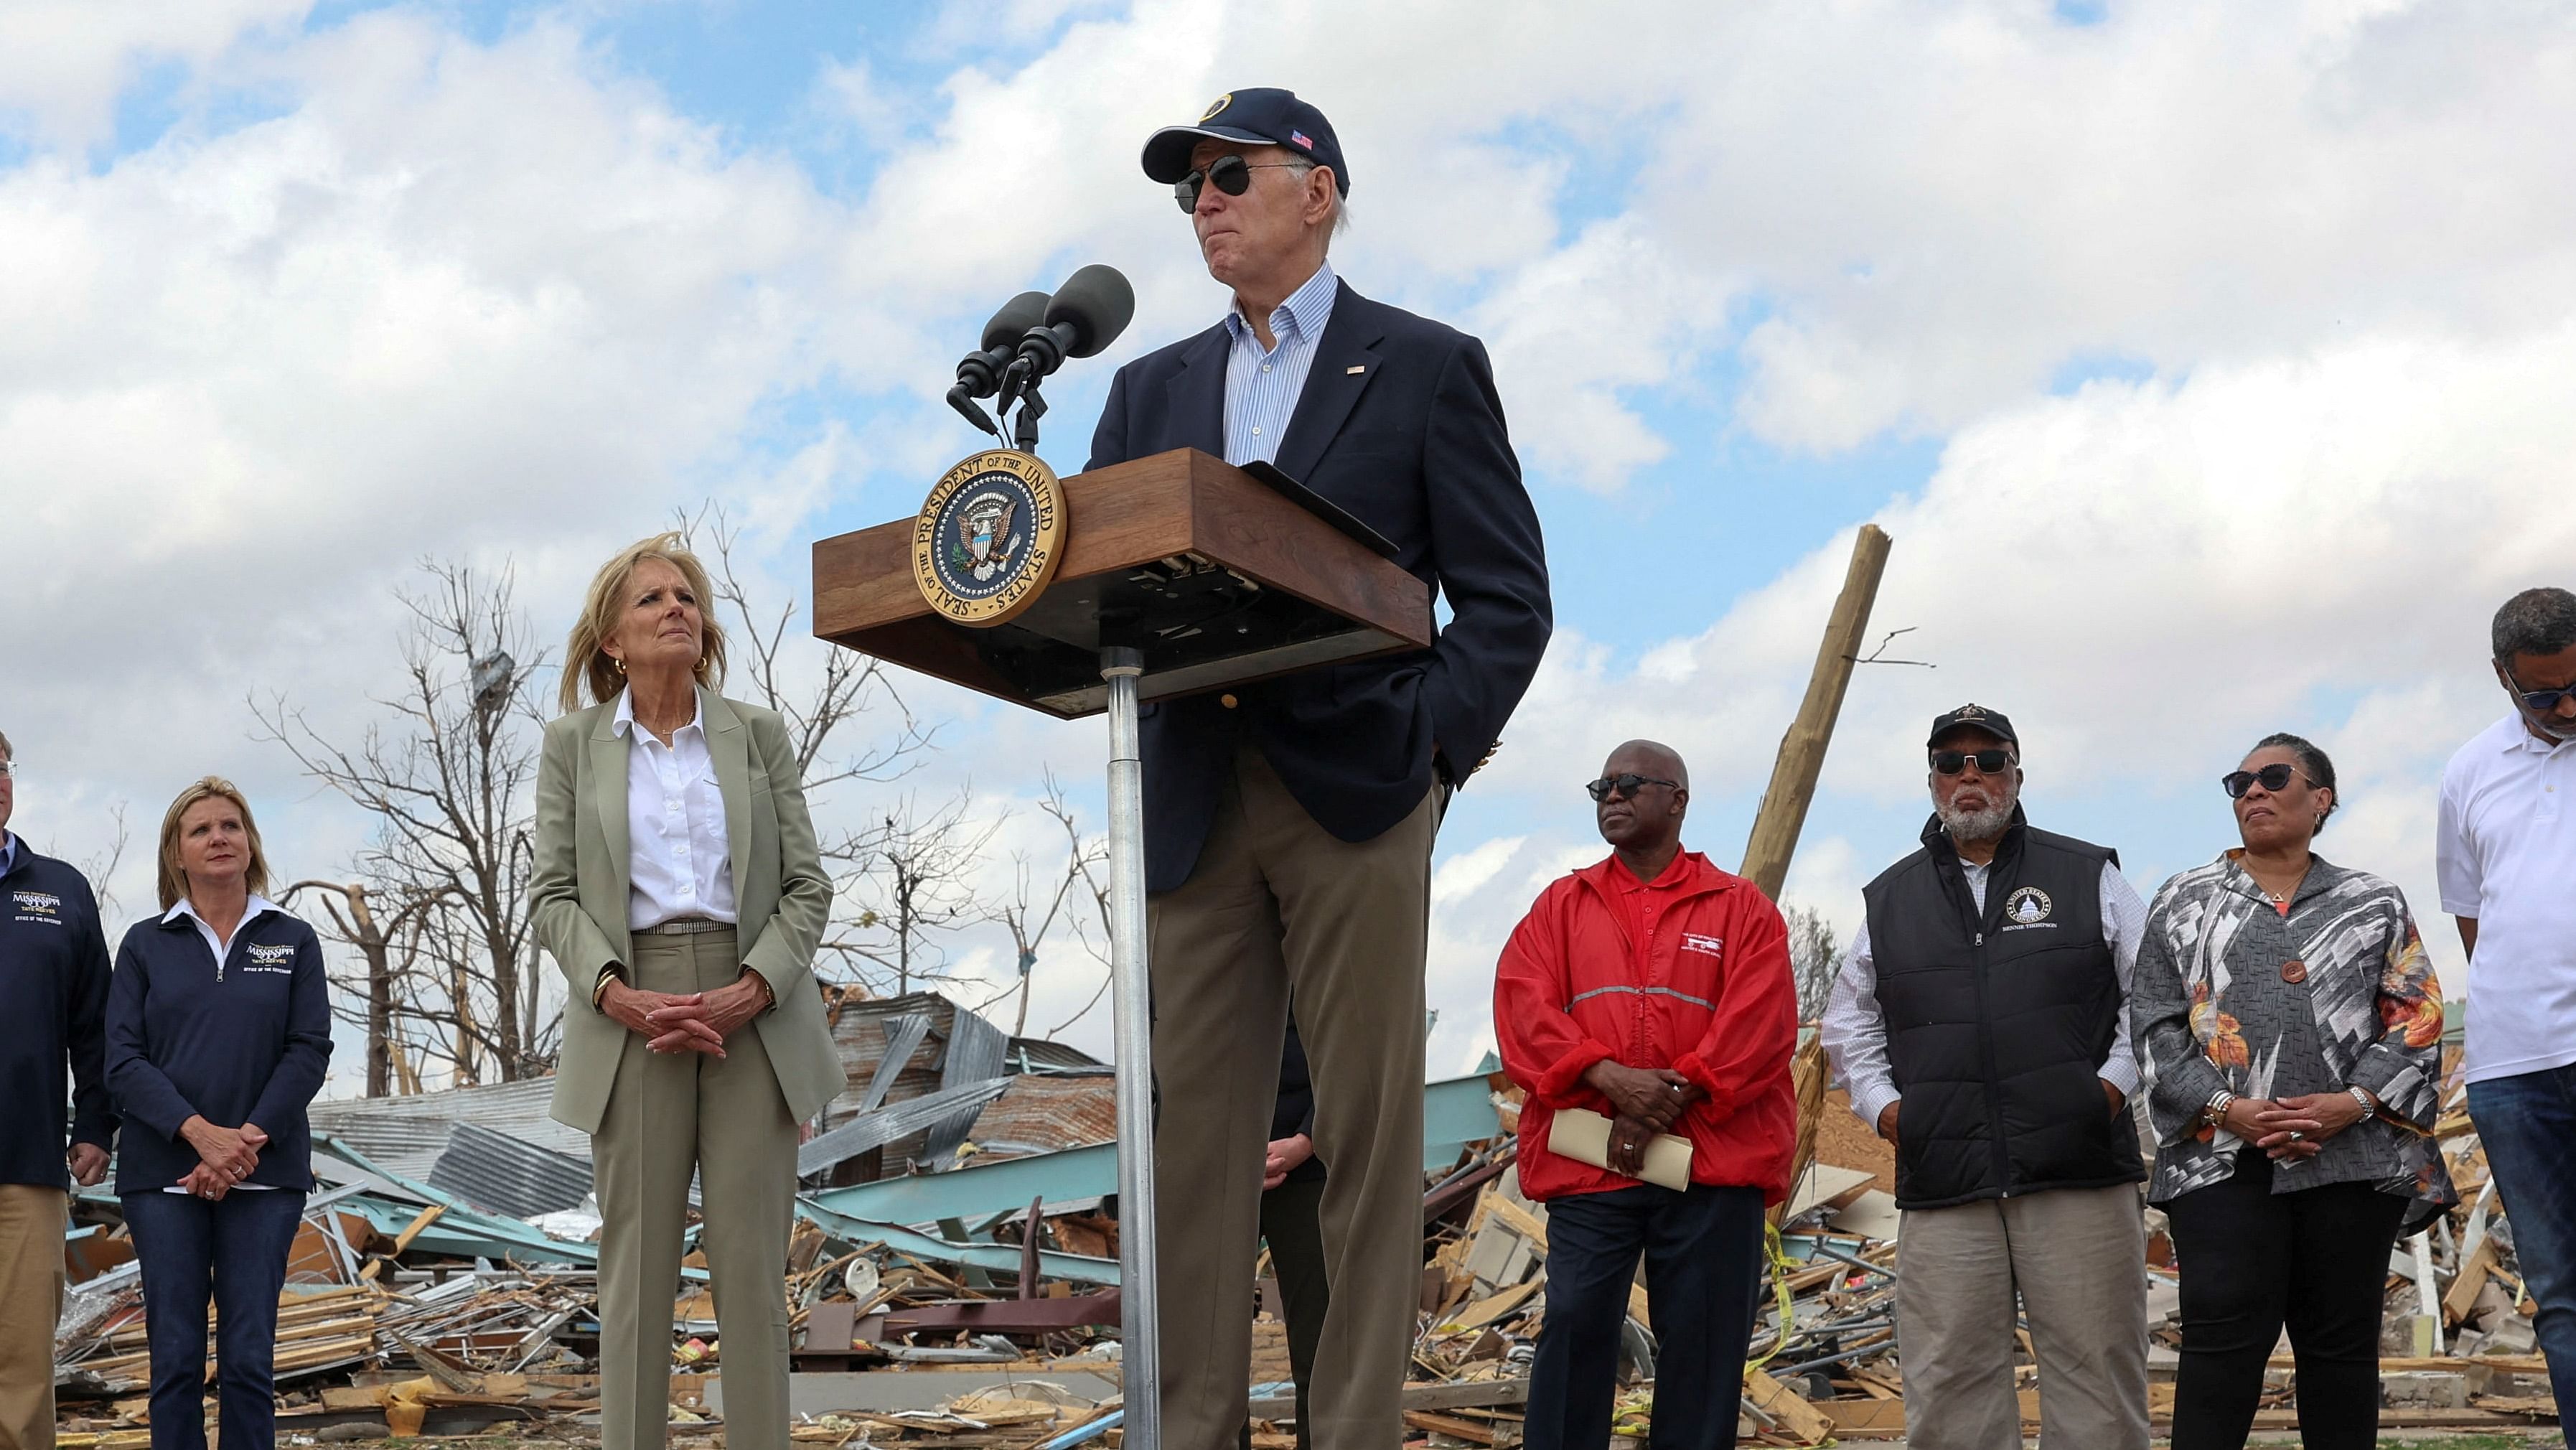 U.S. President Joe Biden delivers remarks on his administration's commitment to support the people of Mississippi as they recover and rebuild following the deadly weekend tornadoes and storms, as first lady Jill Biden and officials look on, in Rolling Fork, Mississippi. Credit: Reuters Photo